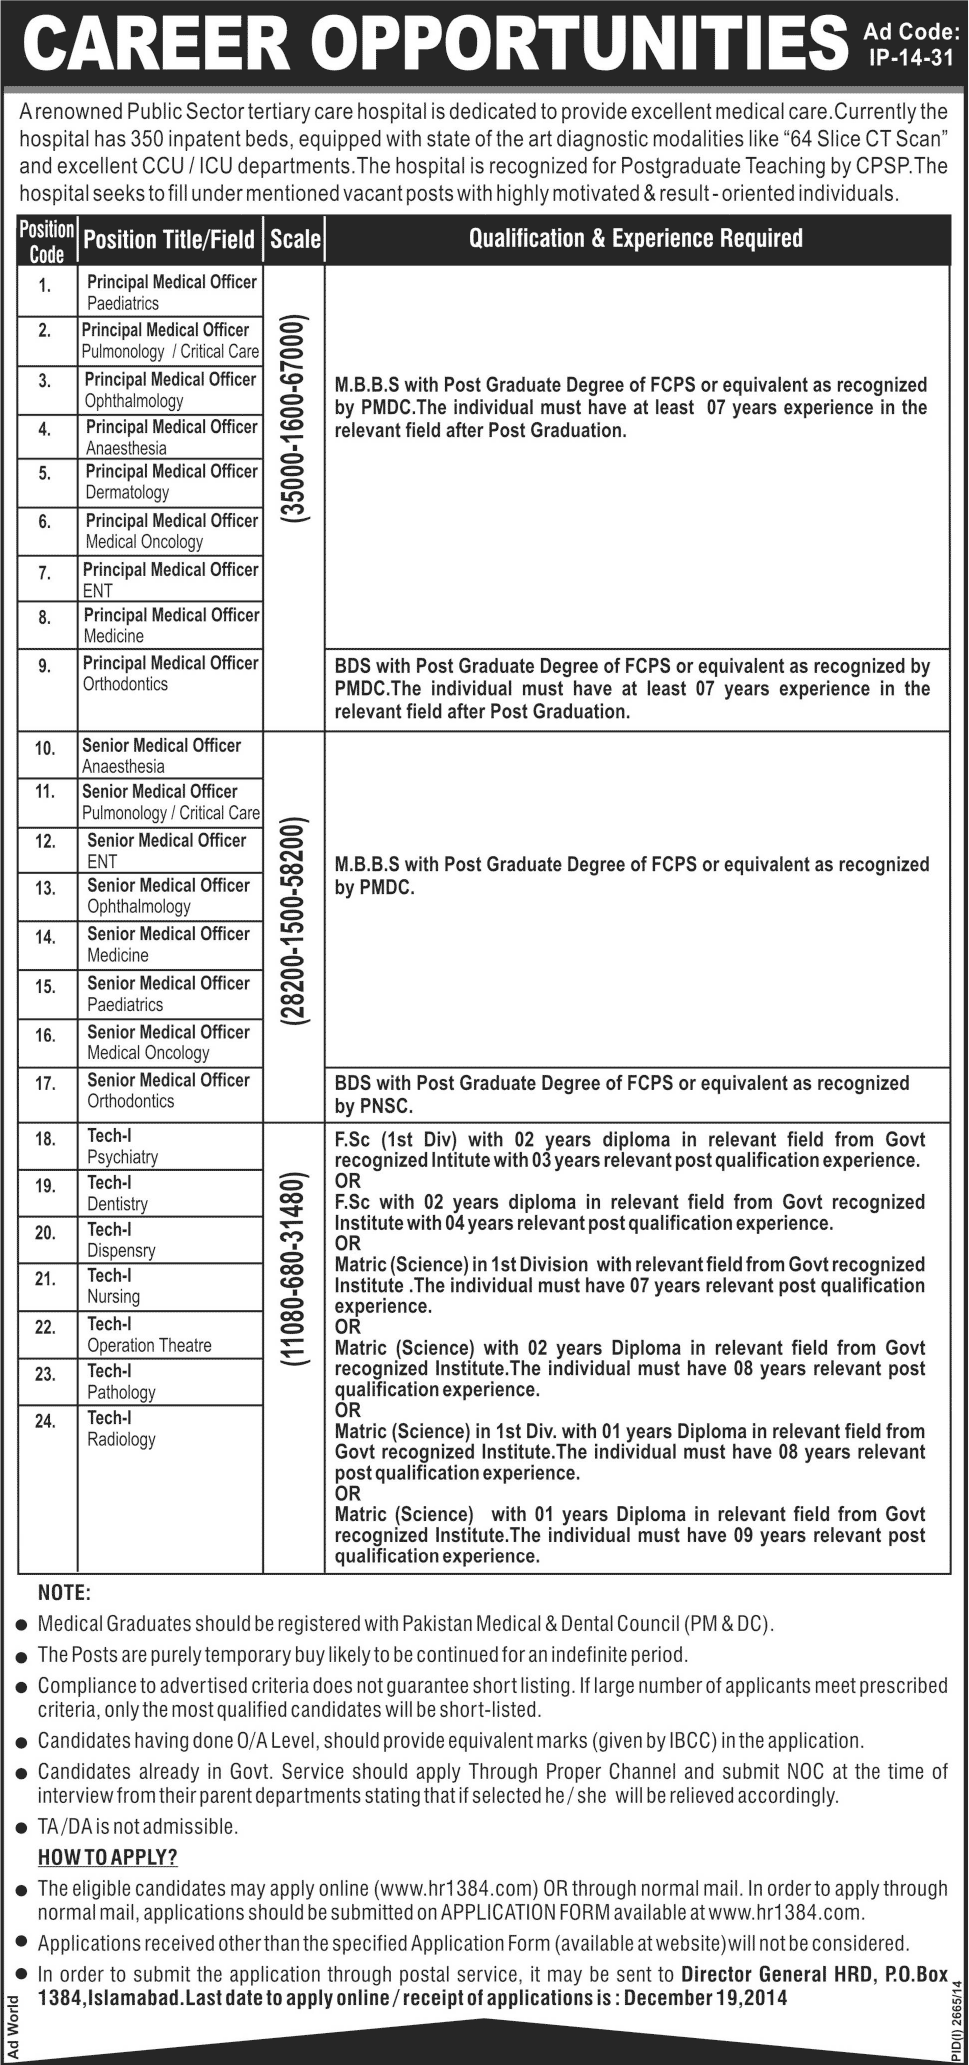 Medical Officers Jobs in HR 1384 Islamabad AD Code: IP-14-31